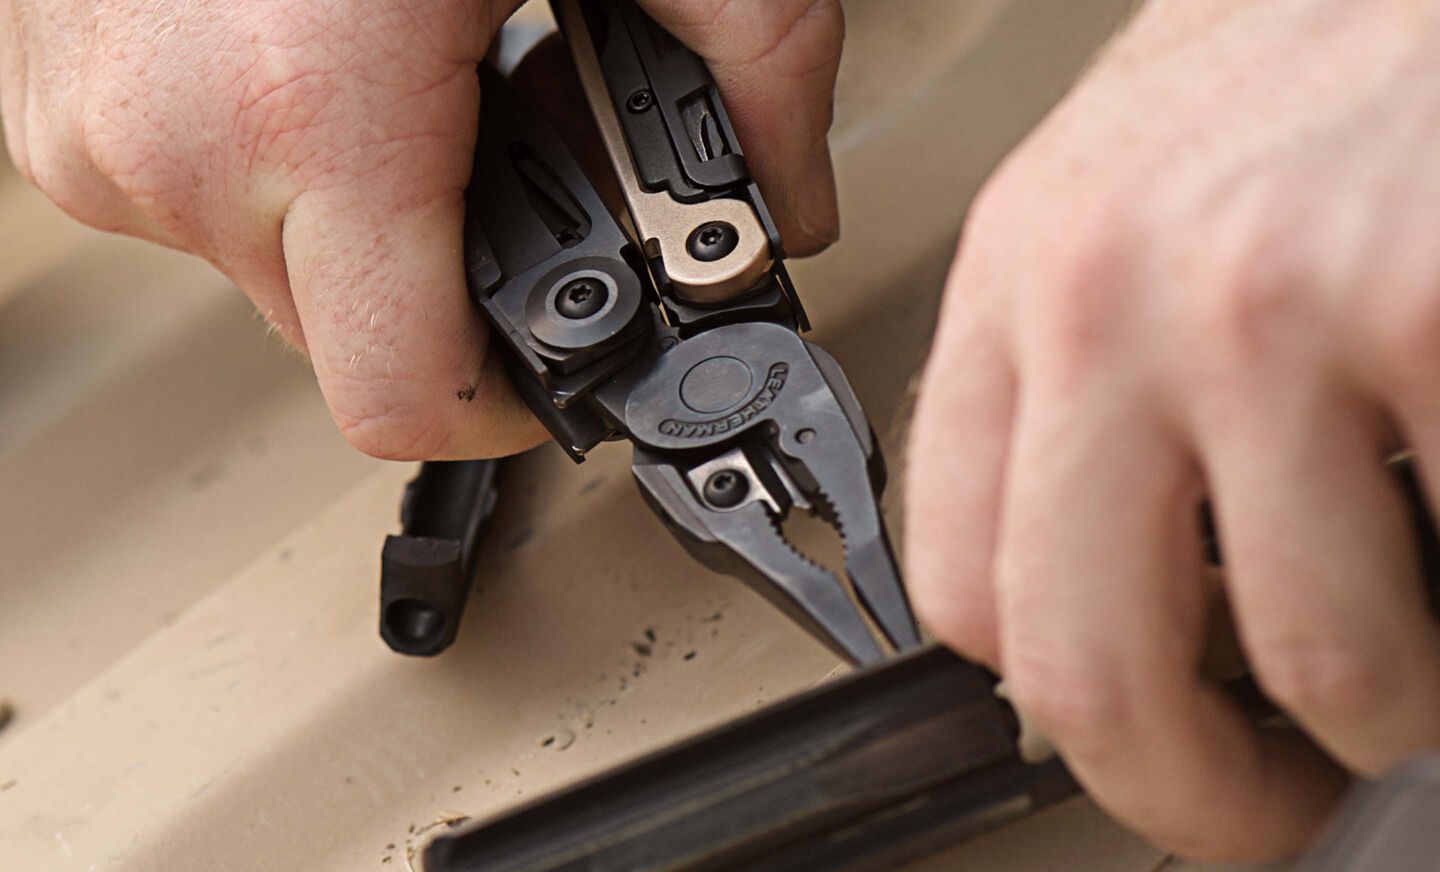 MUT pliers being used 